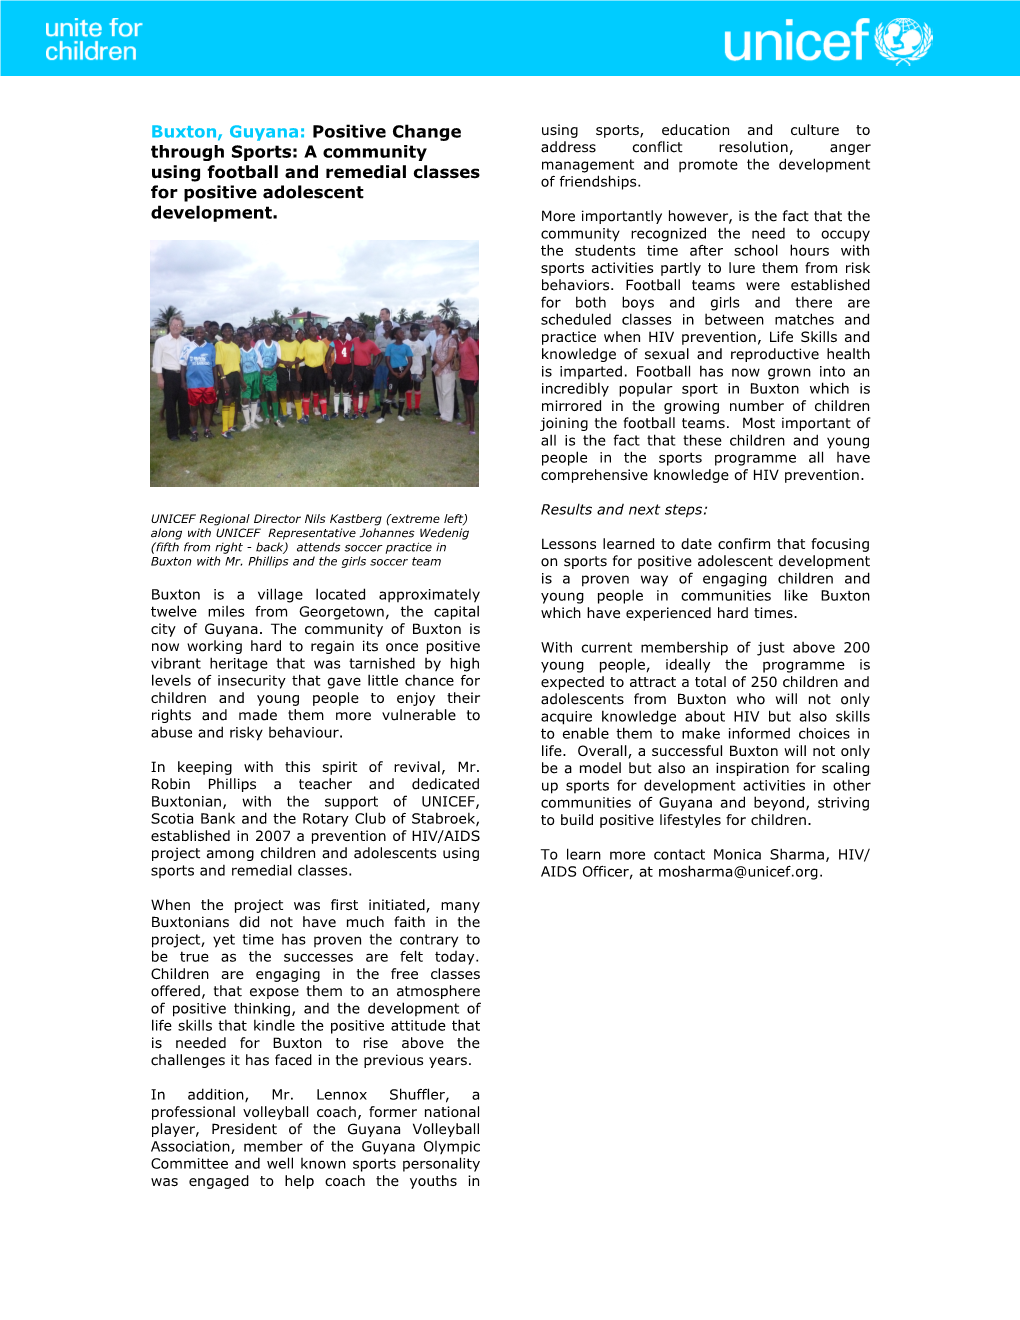 Buxton: Guyana: Positive Change Through Sports: a Community Using Football and Remedial